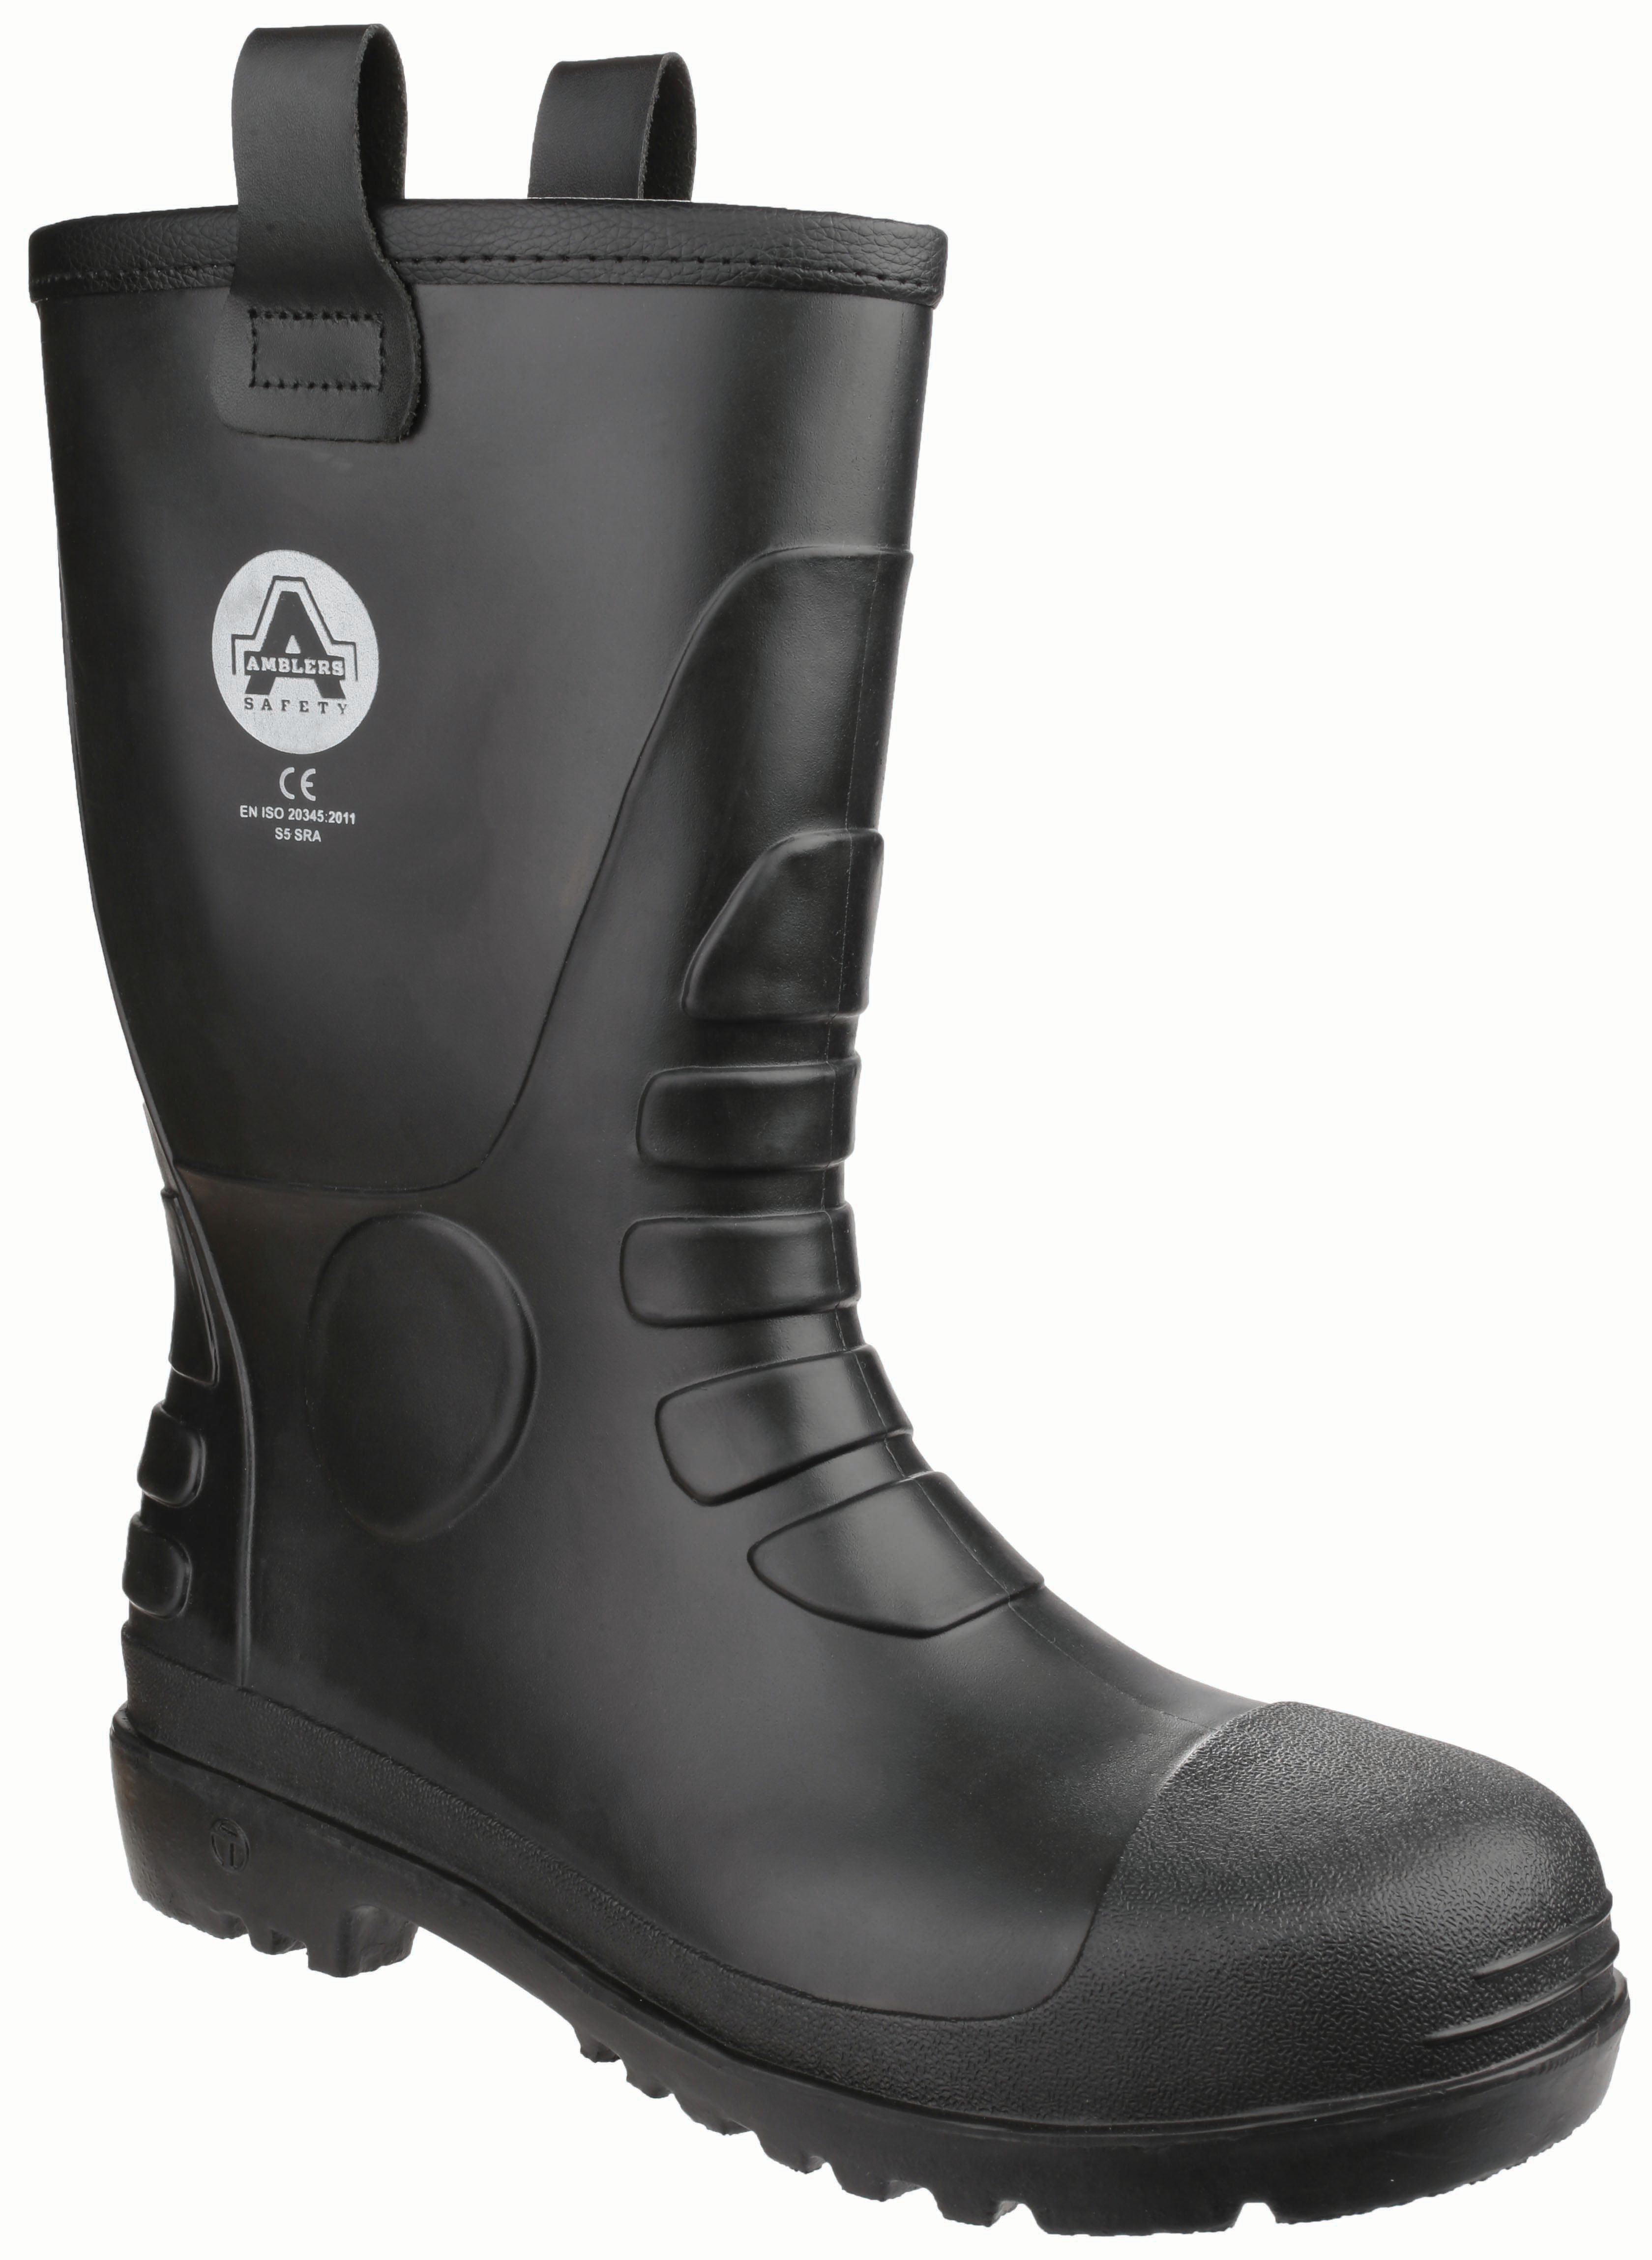 Image of Amblers Safety FS90 Rigger Safety Boot - Black Size 5